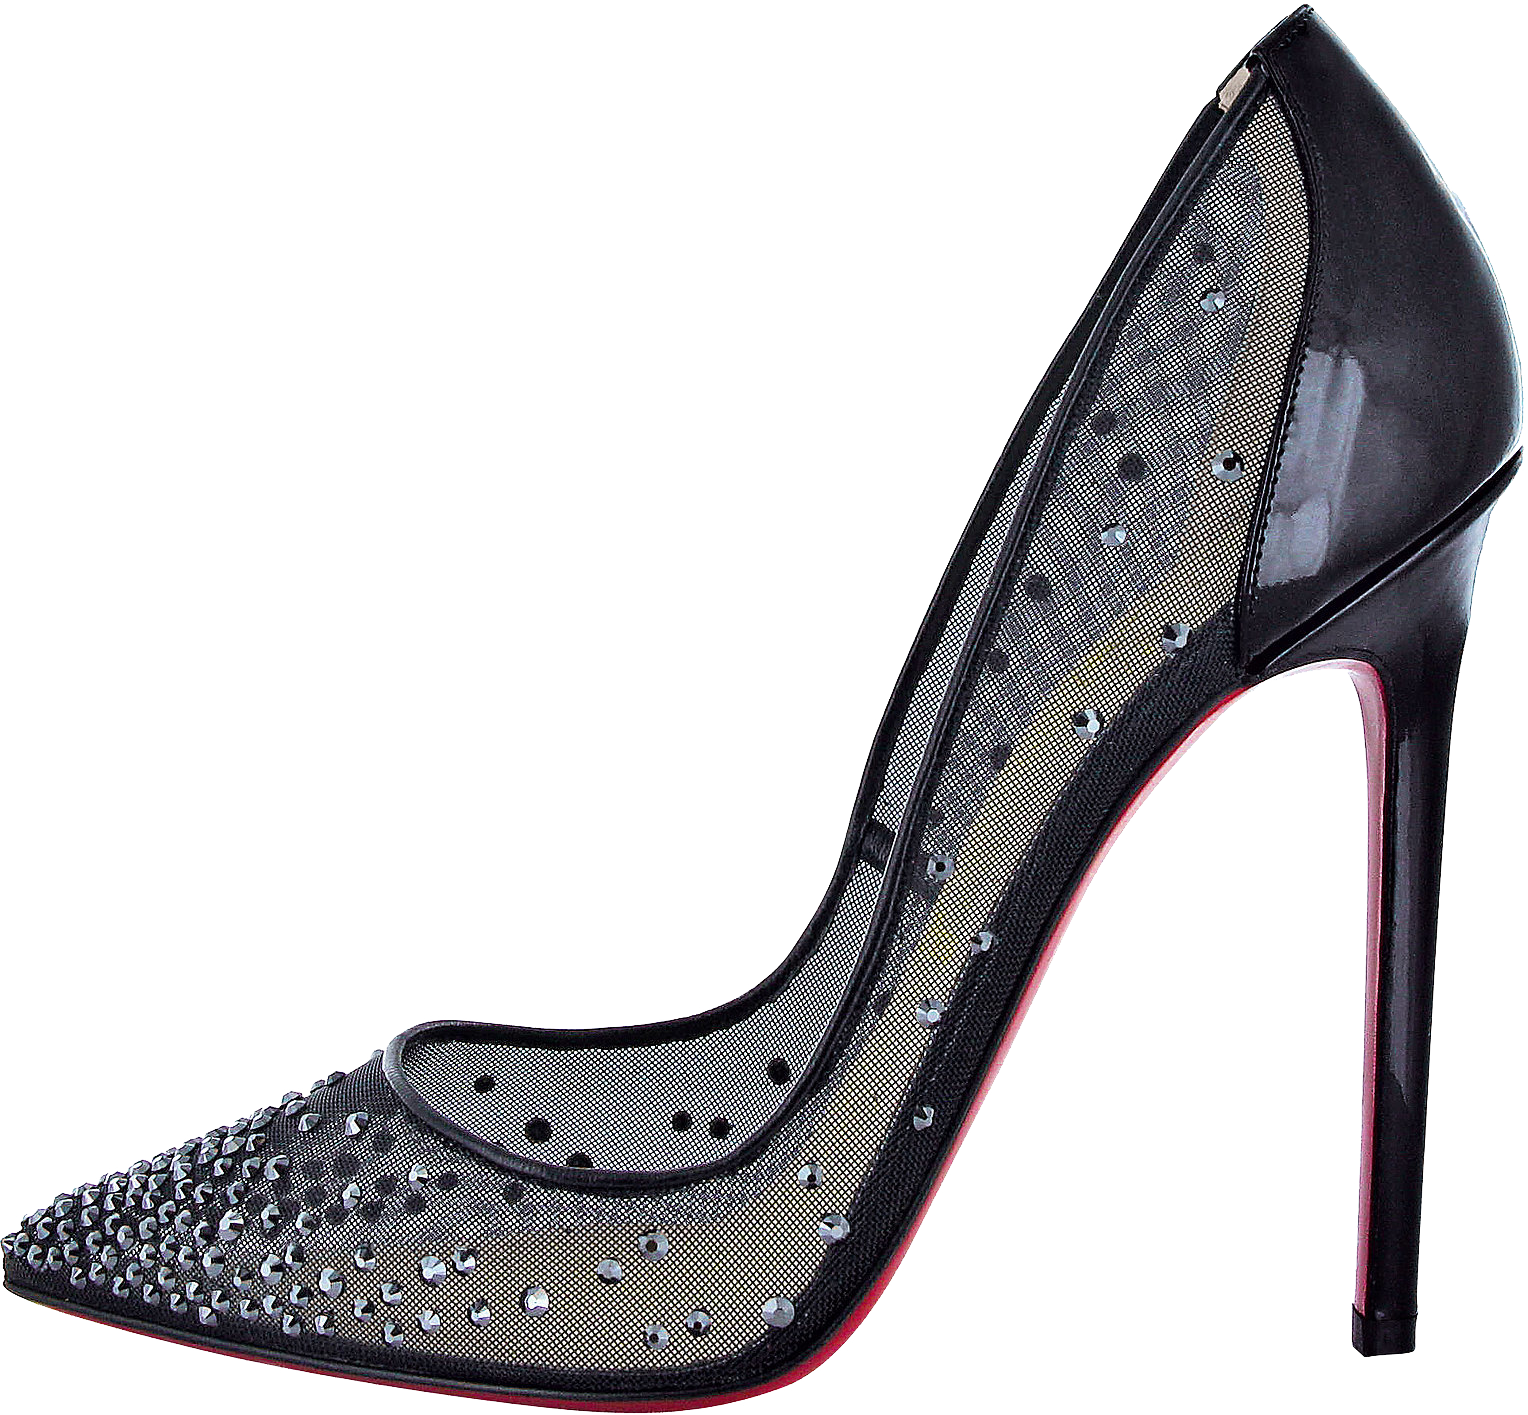 Free download Louboutin PNG image [1528x1415] for your Desktop, Mobile ...